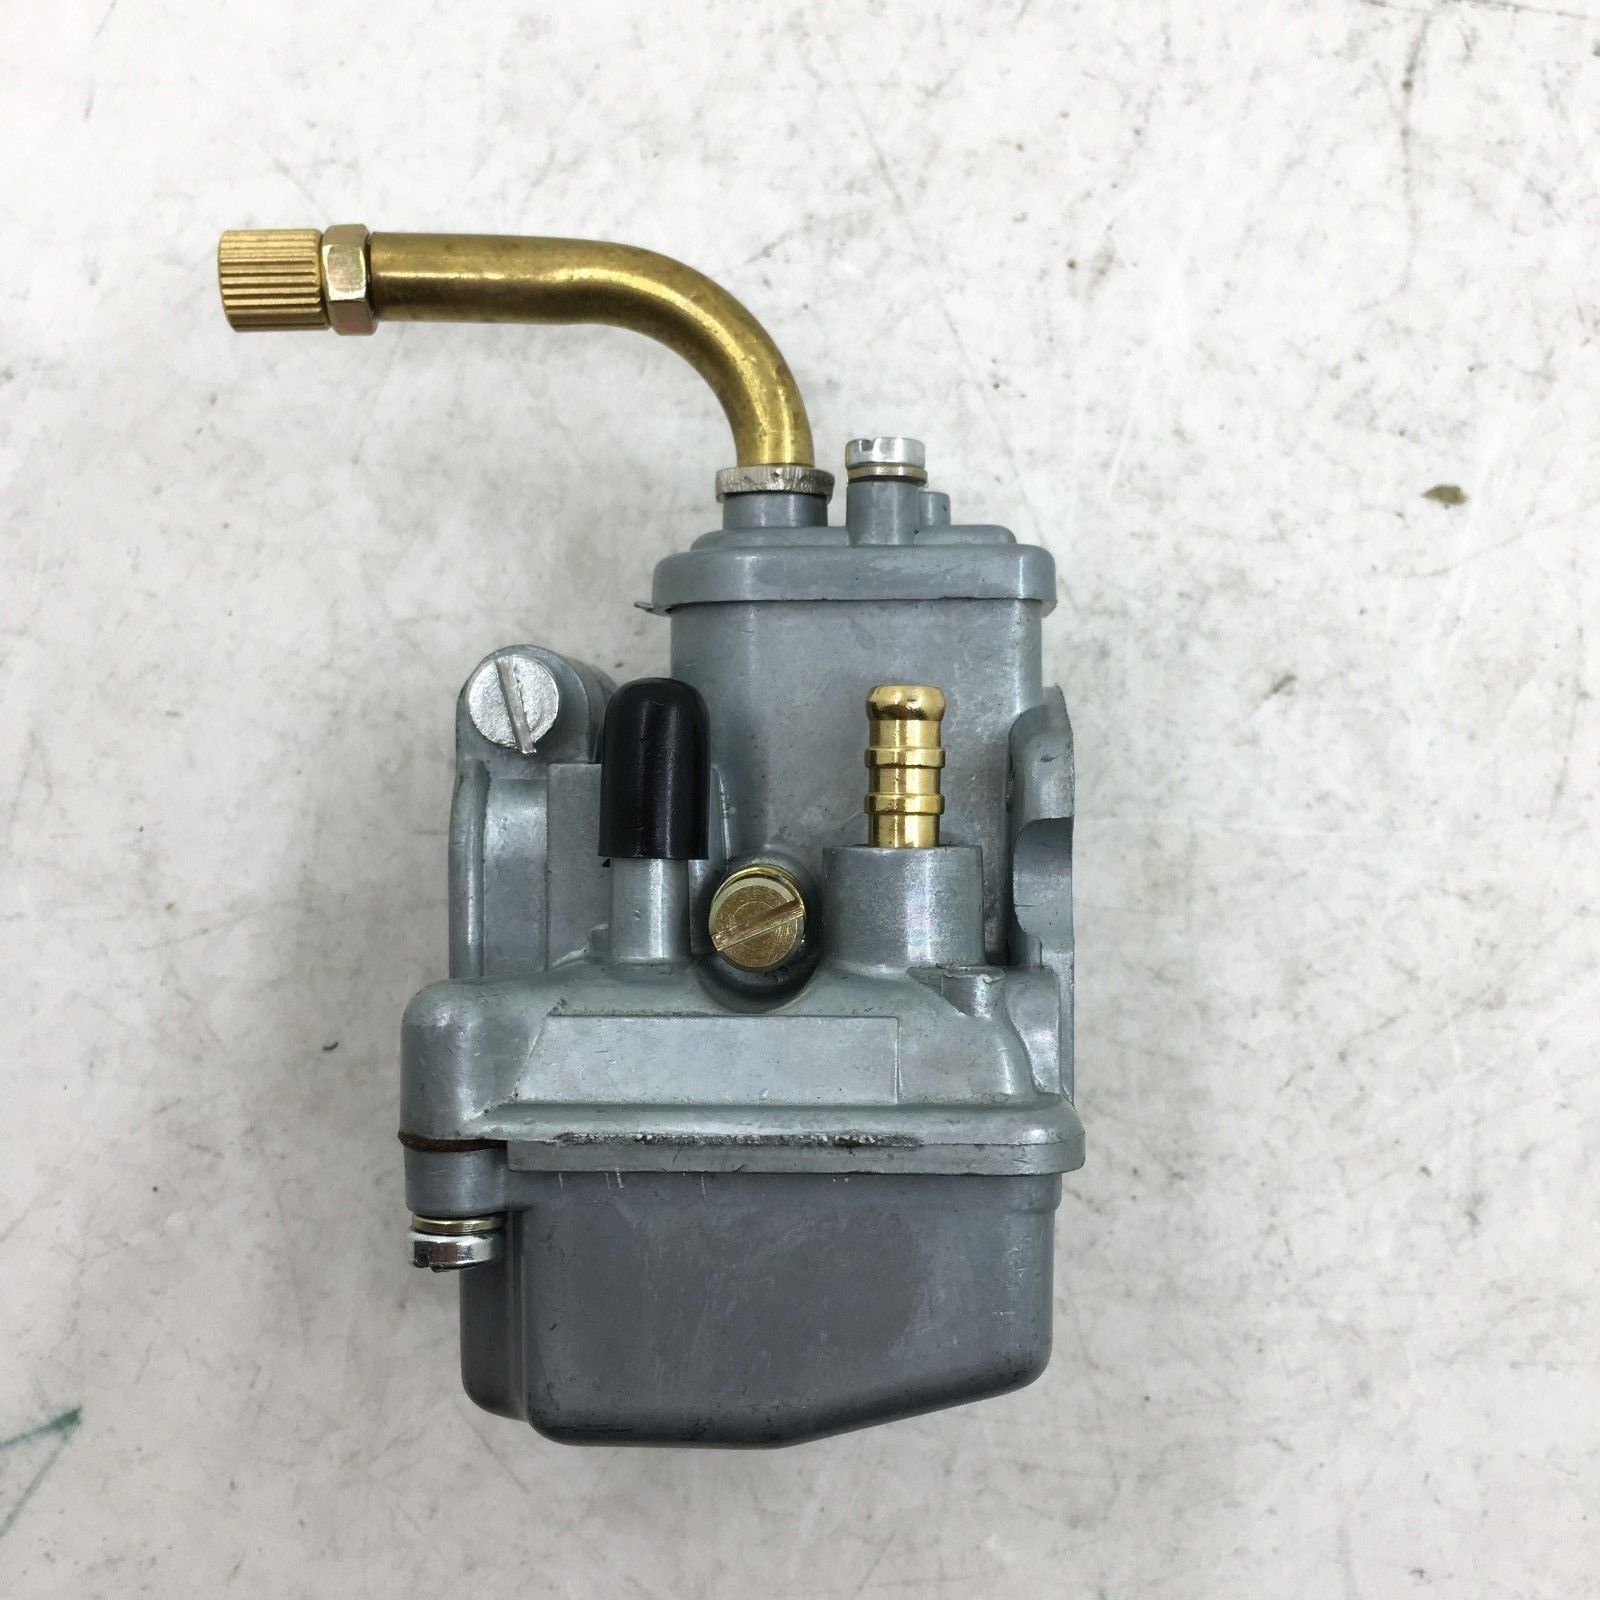 New fit for old bing 12mm CMG 1//12//239 carburetor SACHS 50CC M50 scooter Carb